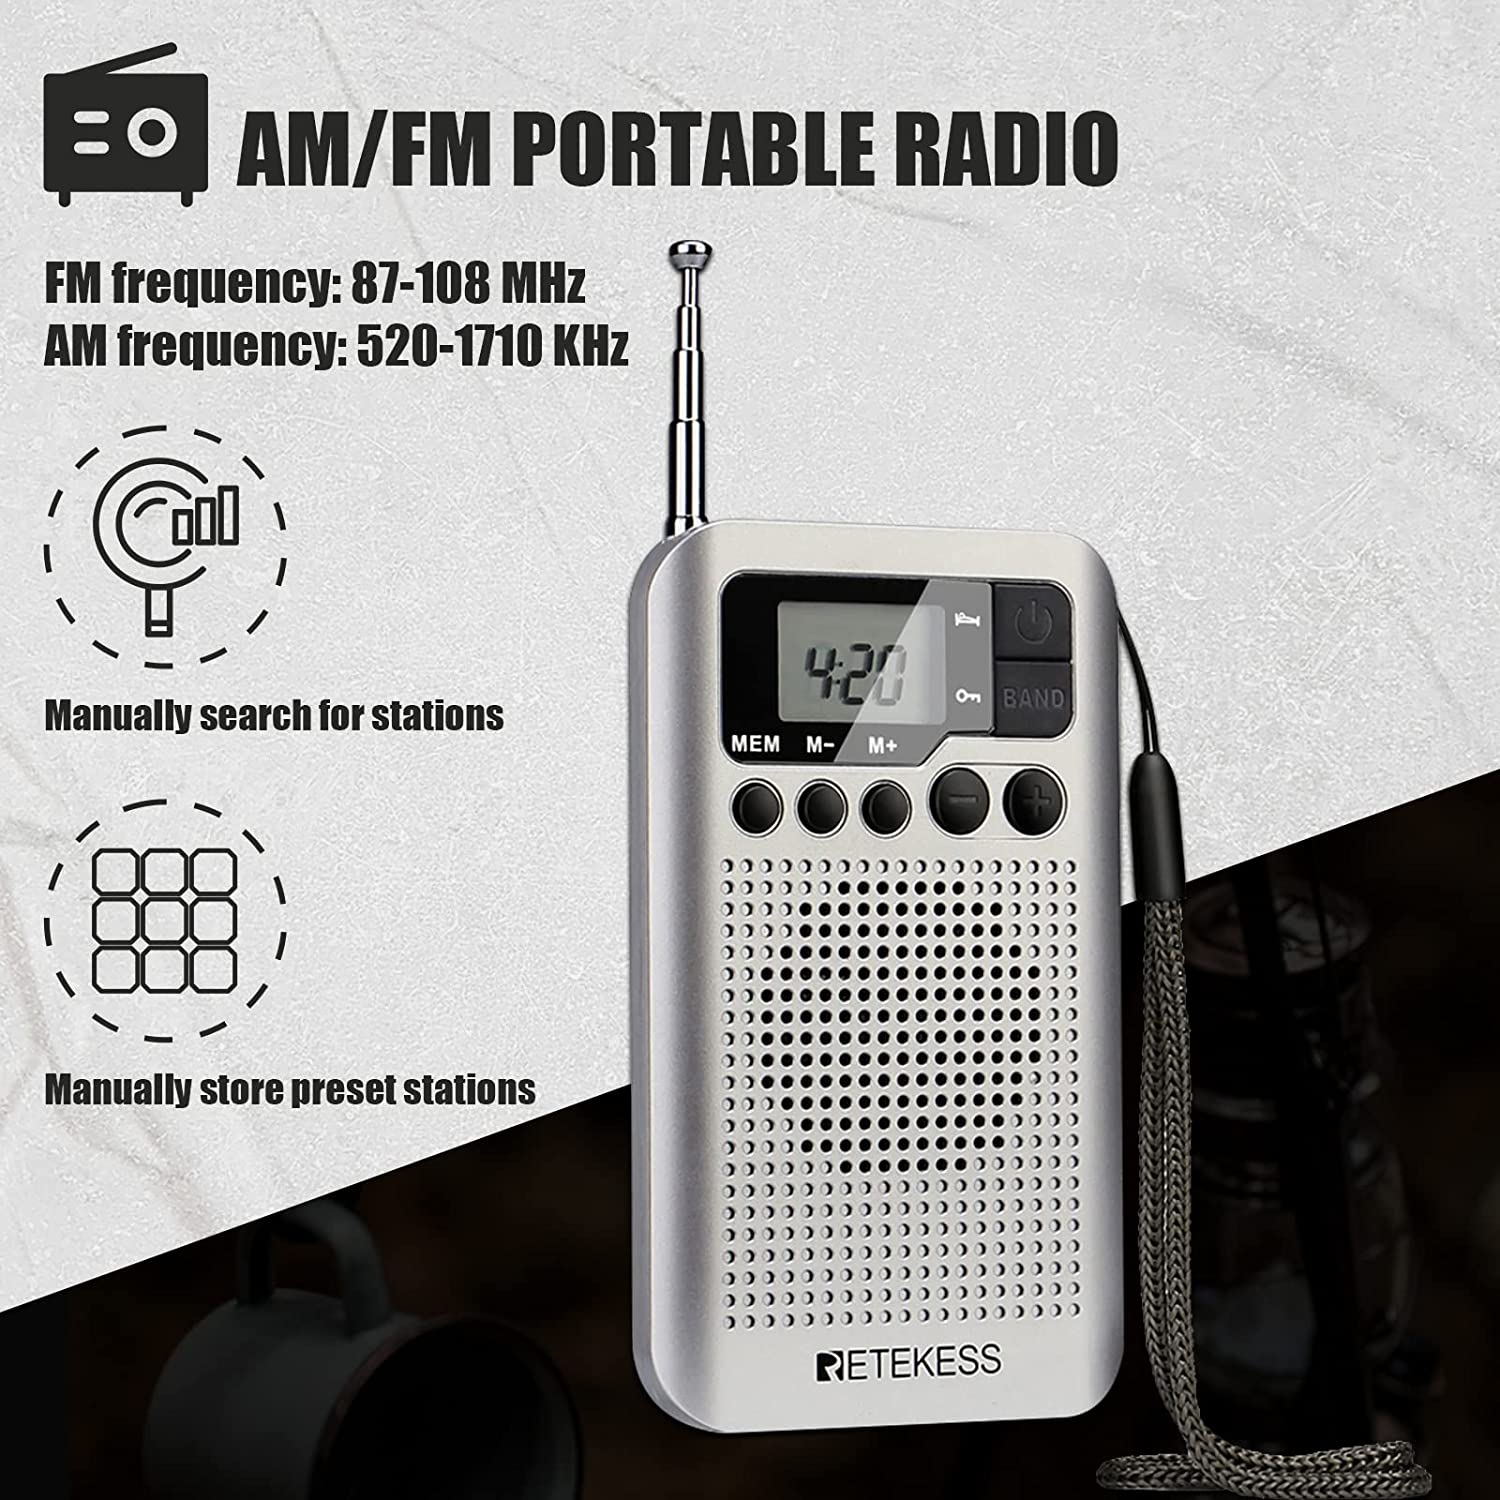 Retekess TR106 Portable Mini Pocket Radios AM FM Digital Tuning, AAA Battery Powered, Support Clock, Alarm, Sleep Timer, FM Stereo for Walking,Thansgiving Christmas New Year Gift(Silver) - image 4 of 10